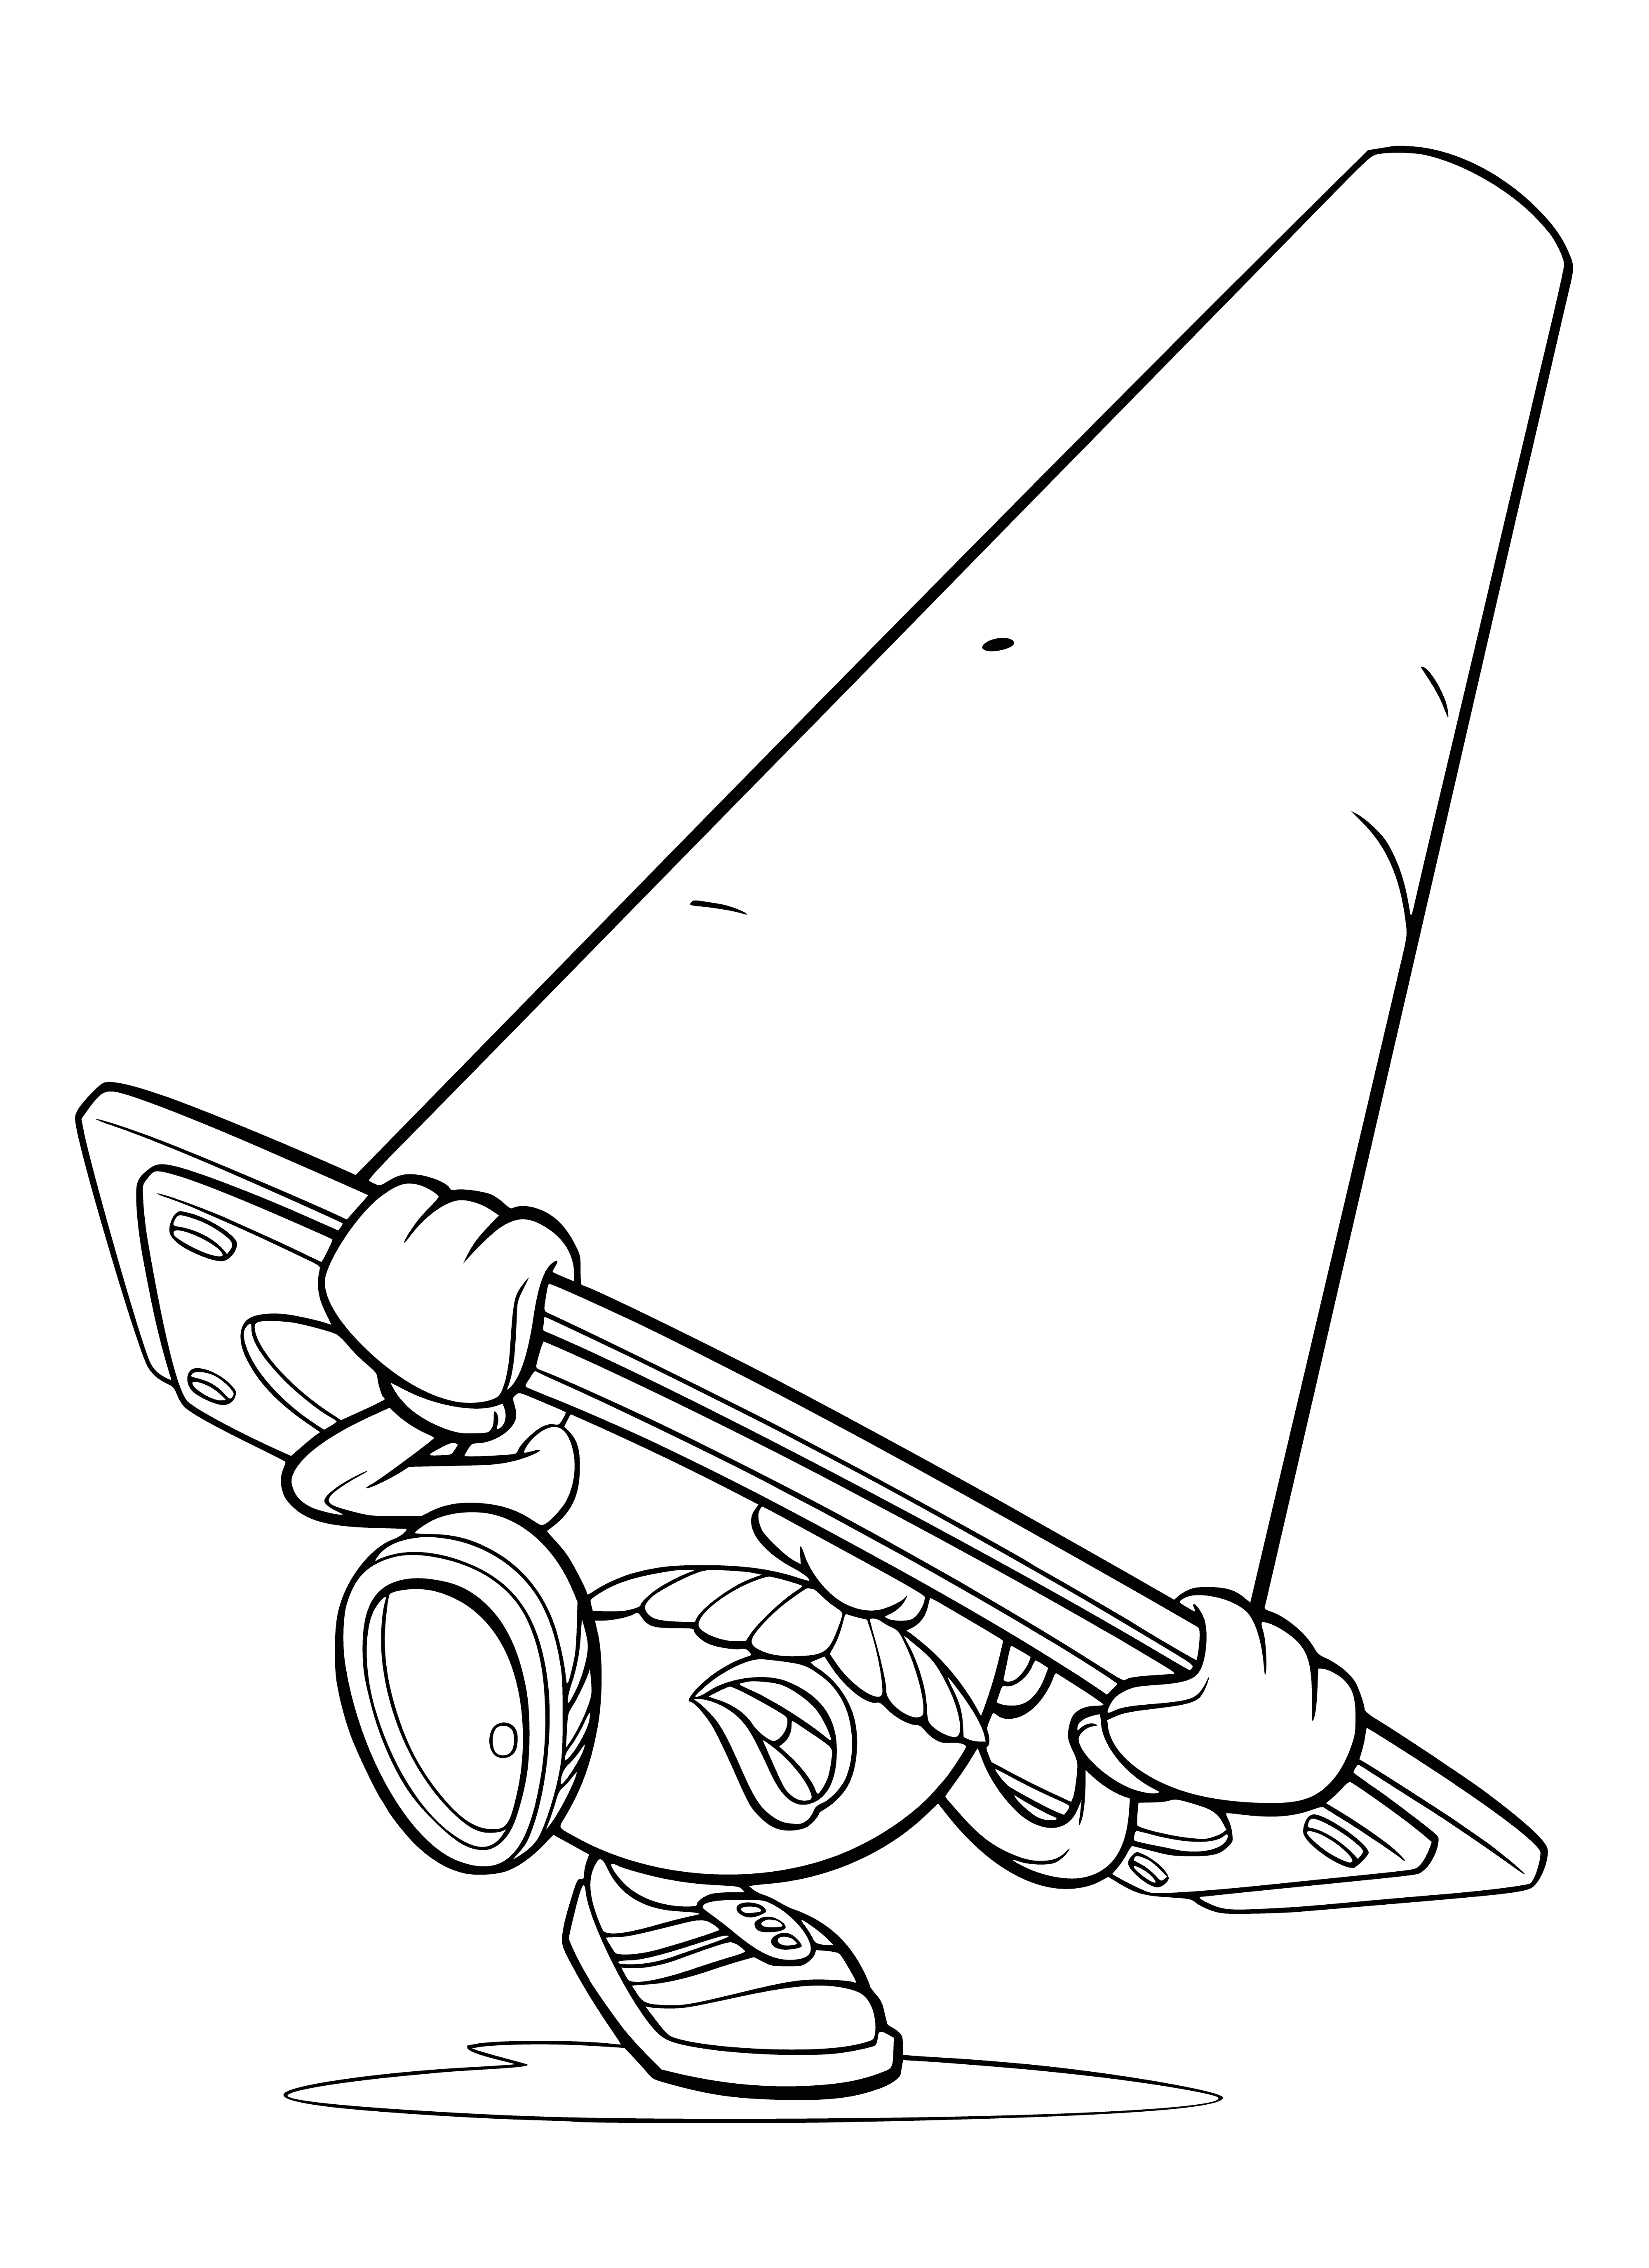 coloring page: Mister Potato Head is stuck under a traffic cone with squished face and awkward limbs sticking out.